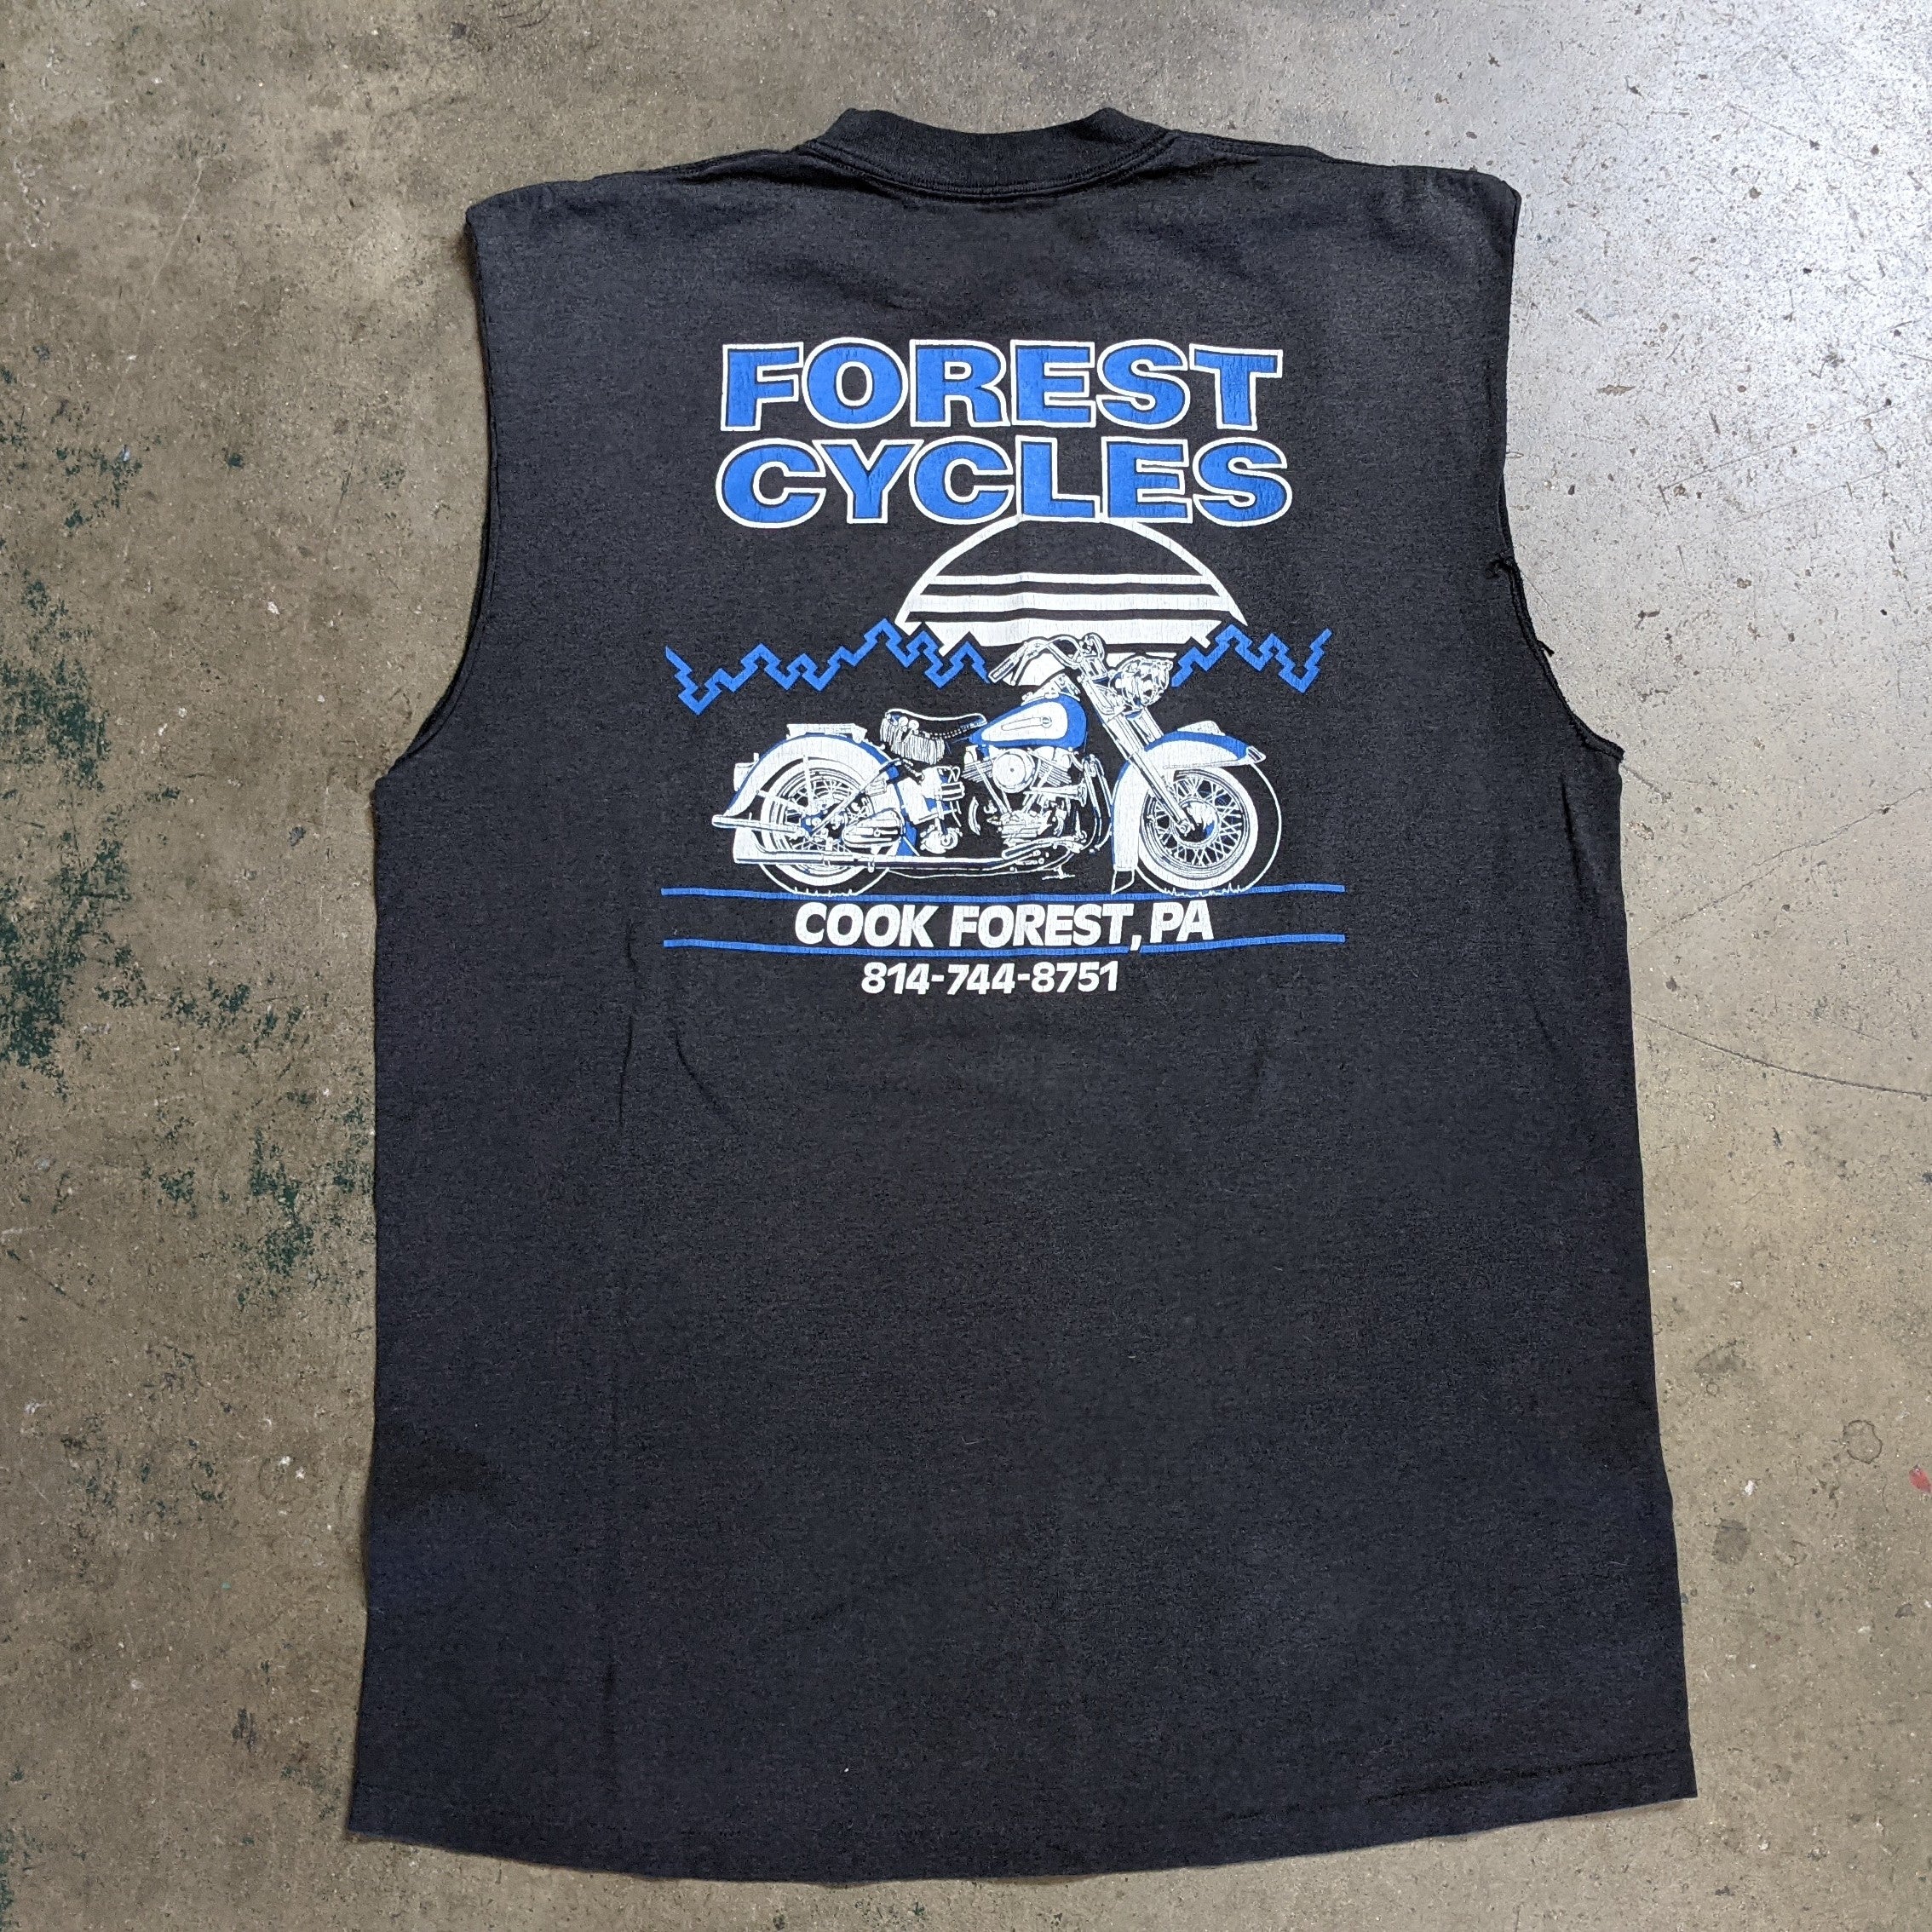 Vintage 1990 Forest Cycles Harley Davidson Cutoff Muscle Tee Shirt